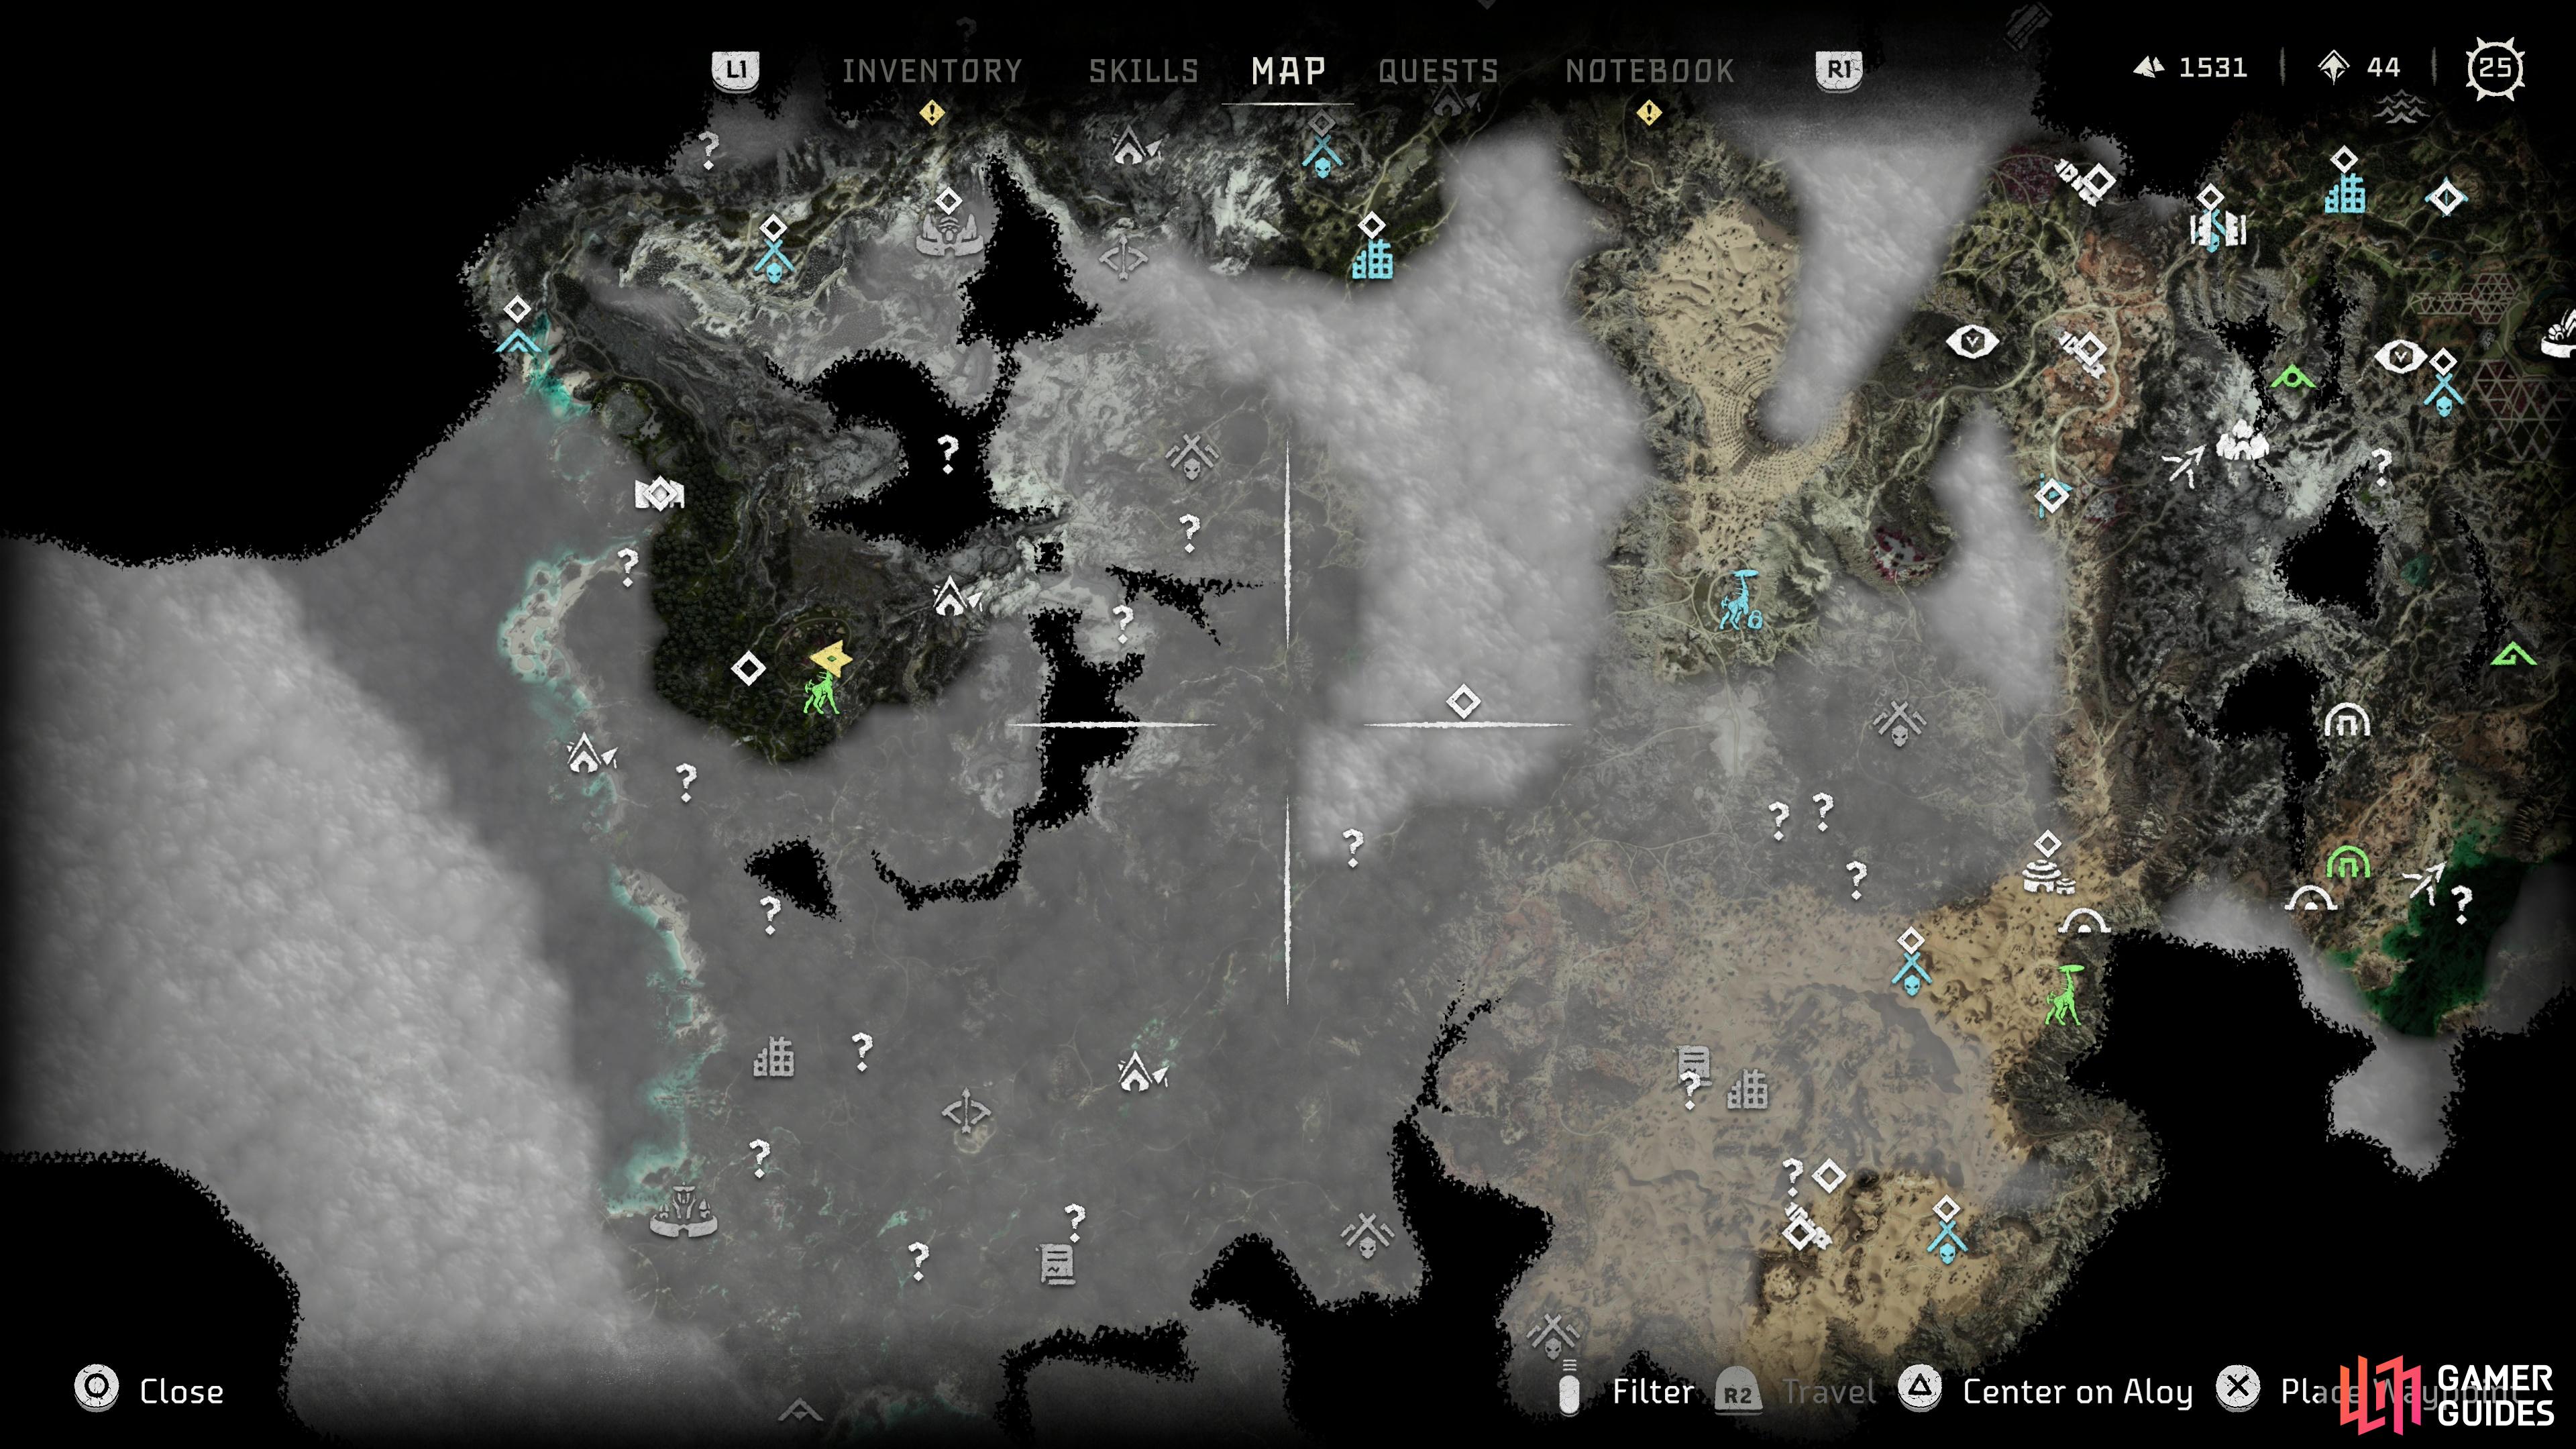 Overriding a Tallneck will reveal numerous map location and make the fog of war translucent.